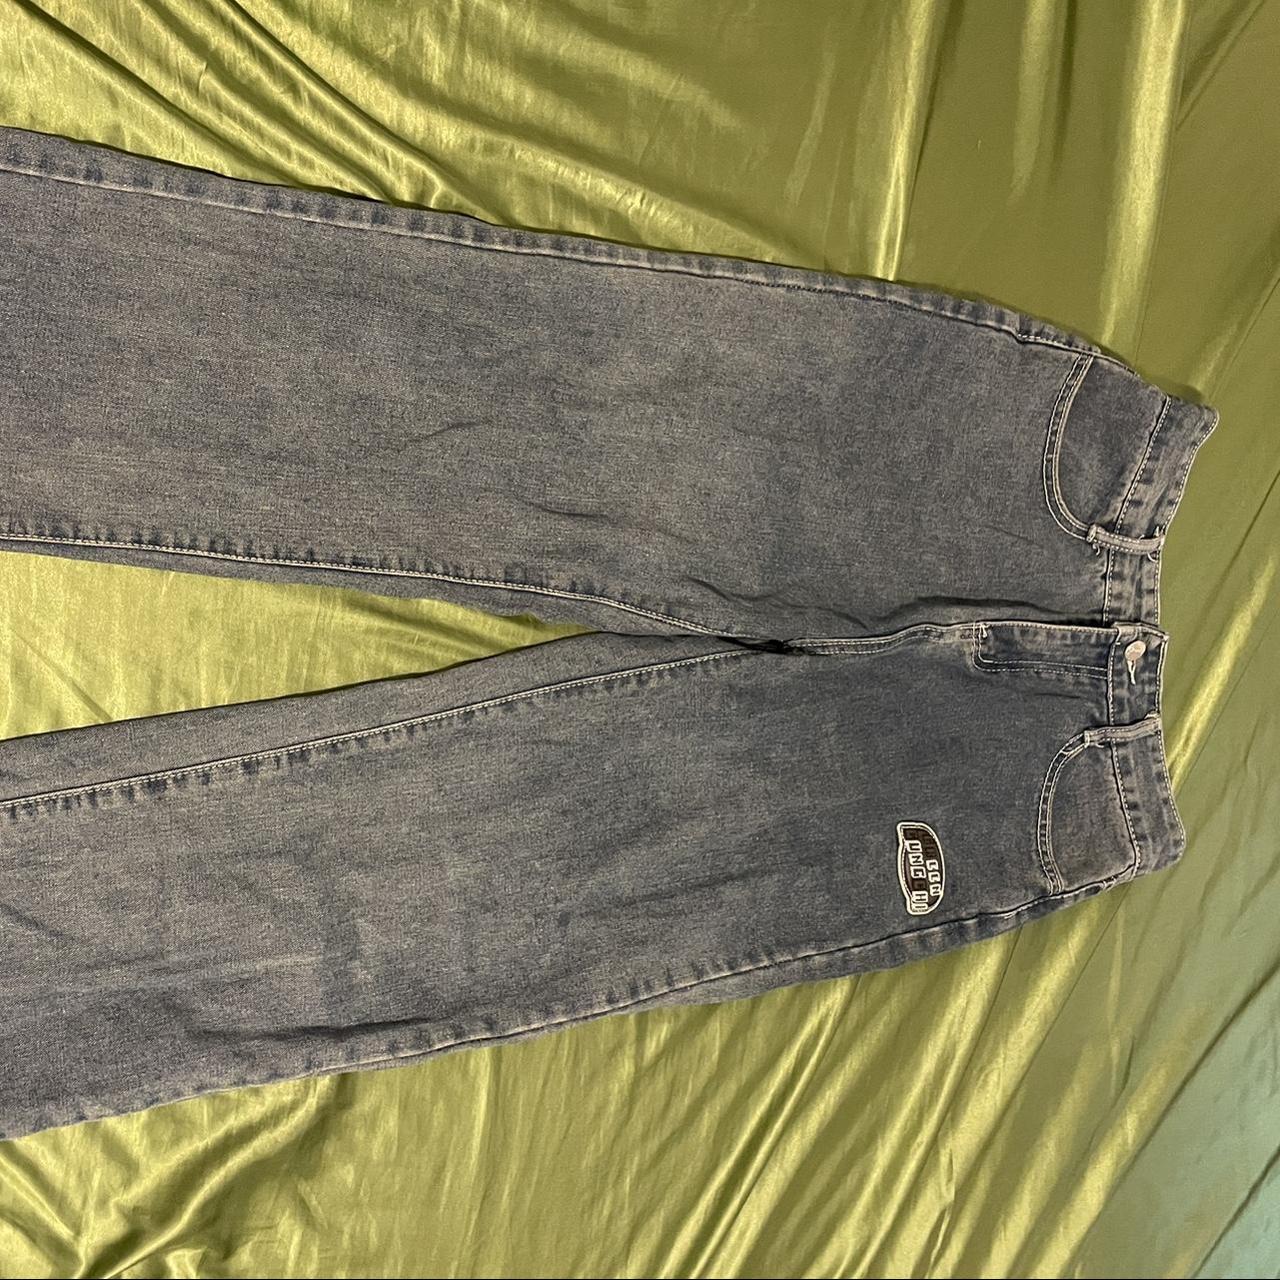 Rare Green Gungchi Rubber Patch Jeans Size: listed... - Depop